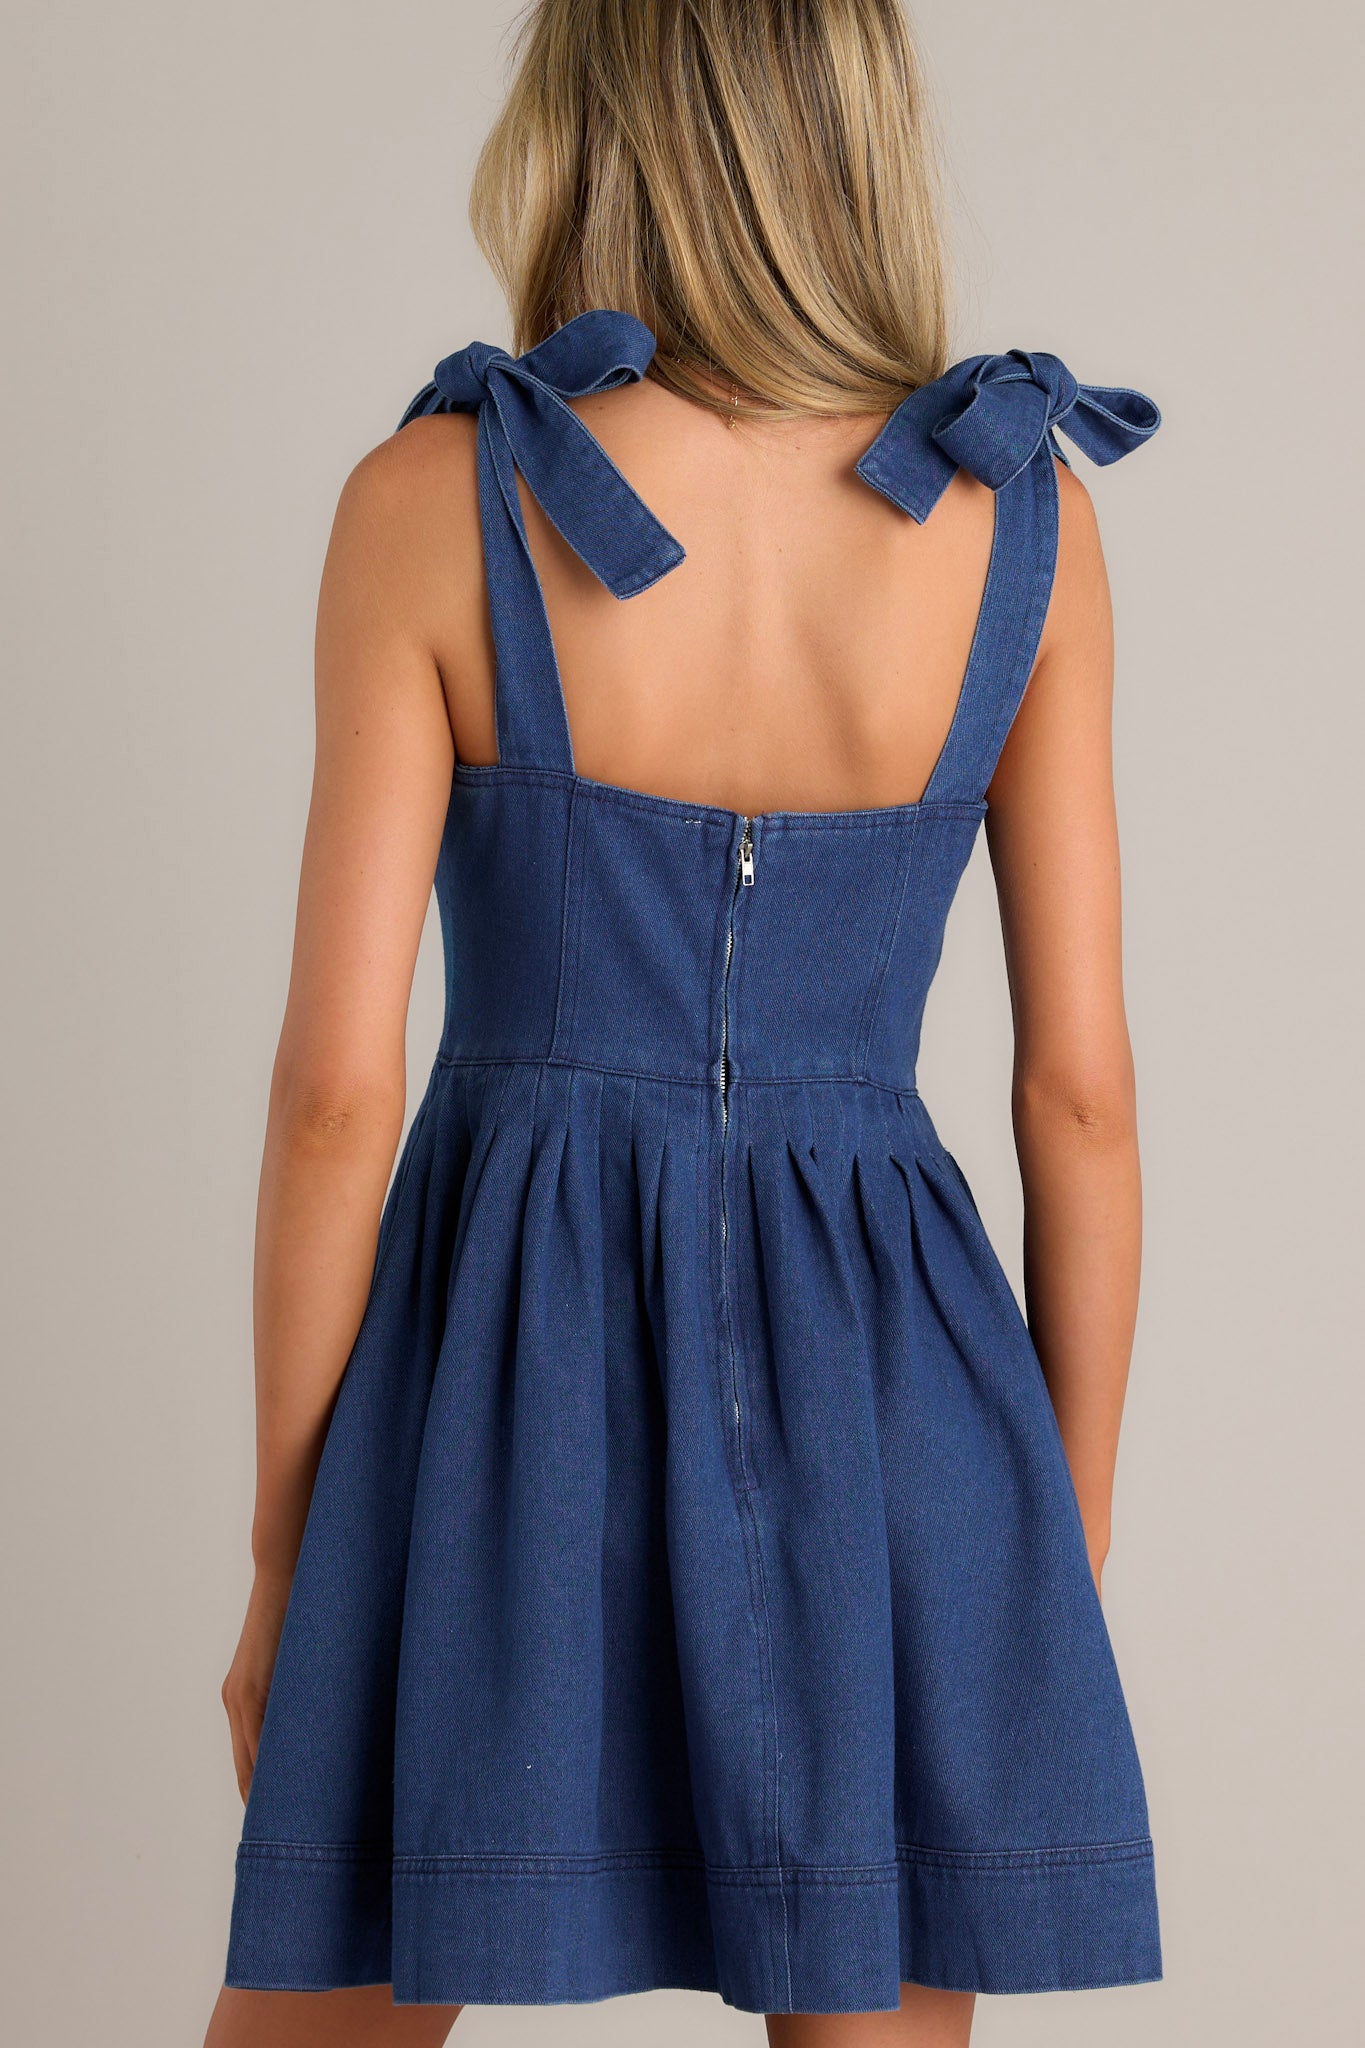 Back view of a denim mini dress highlighting the back zipper, thick self-tie straps, and subtle pleats.